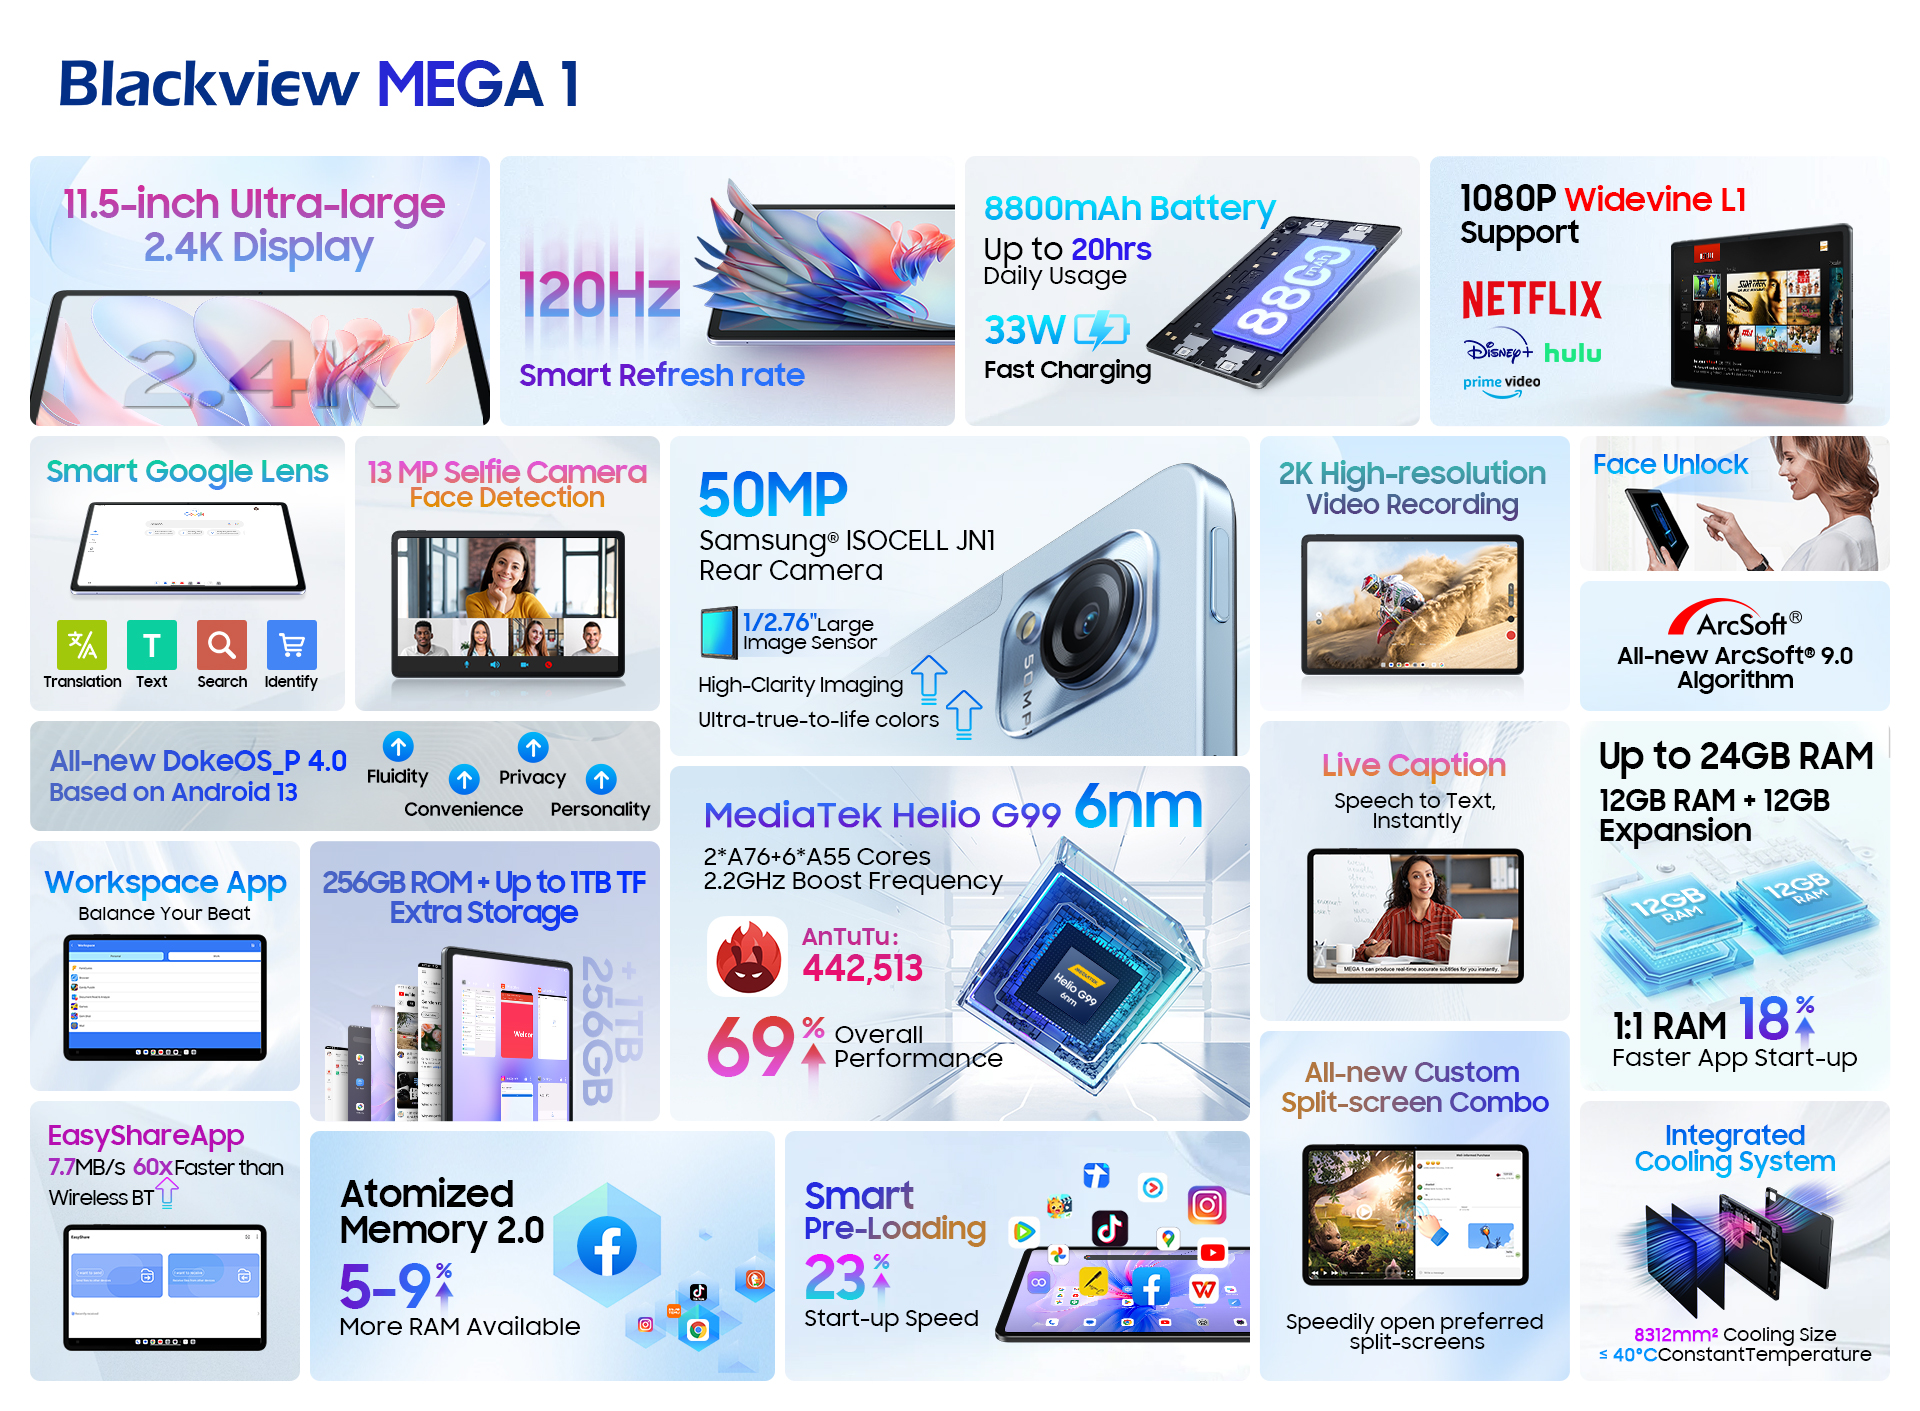 New Mega 1 tablet from Blackview: 11.5-inch display, up to 24 GB of RAM, price - from UAH 9,075